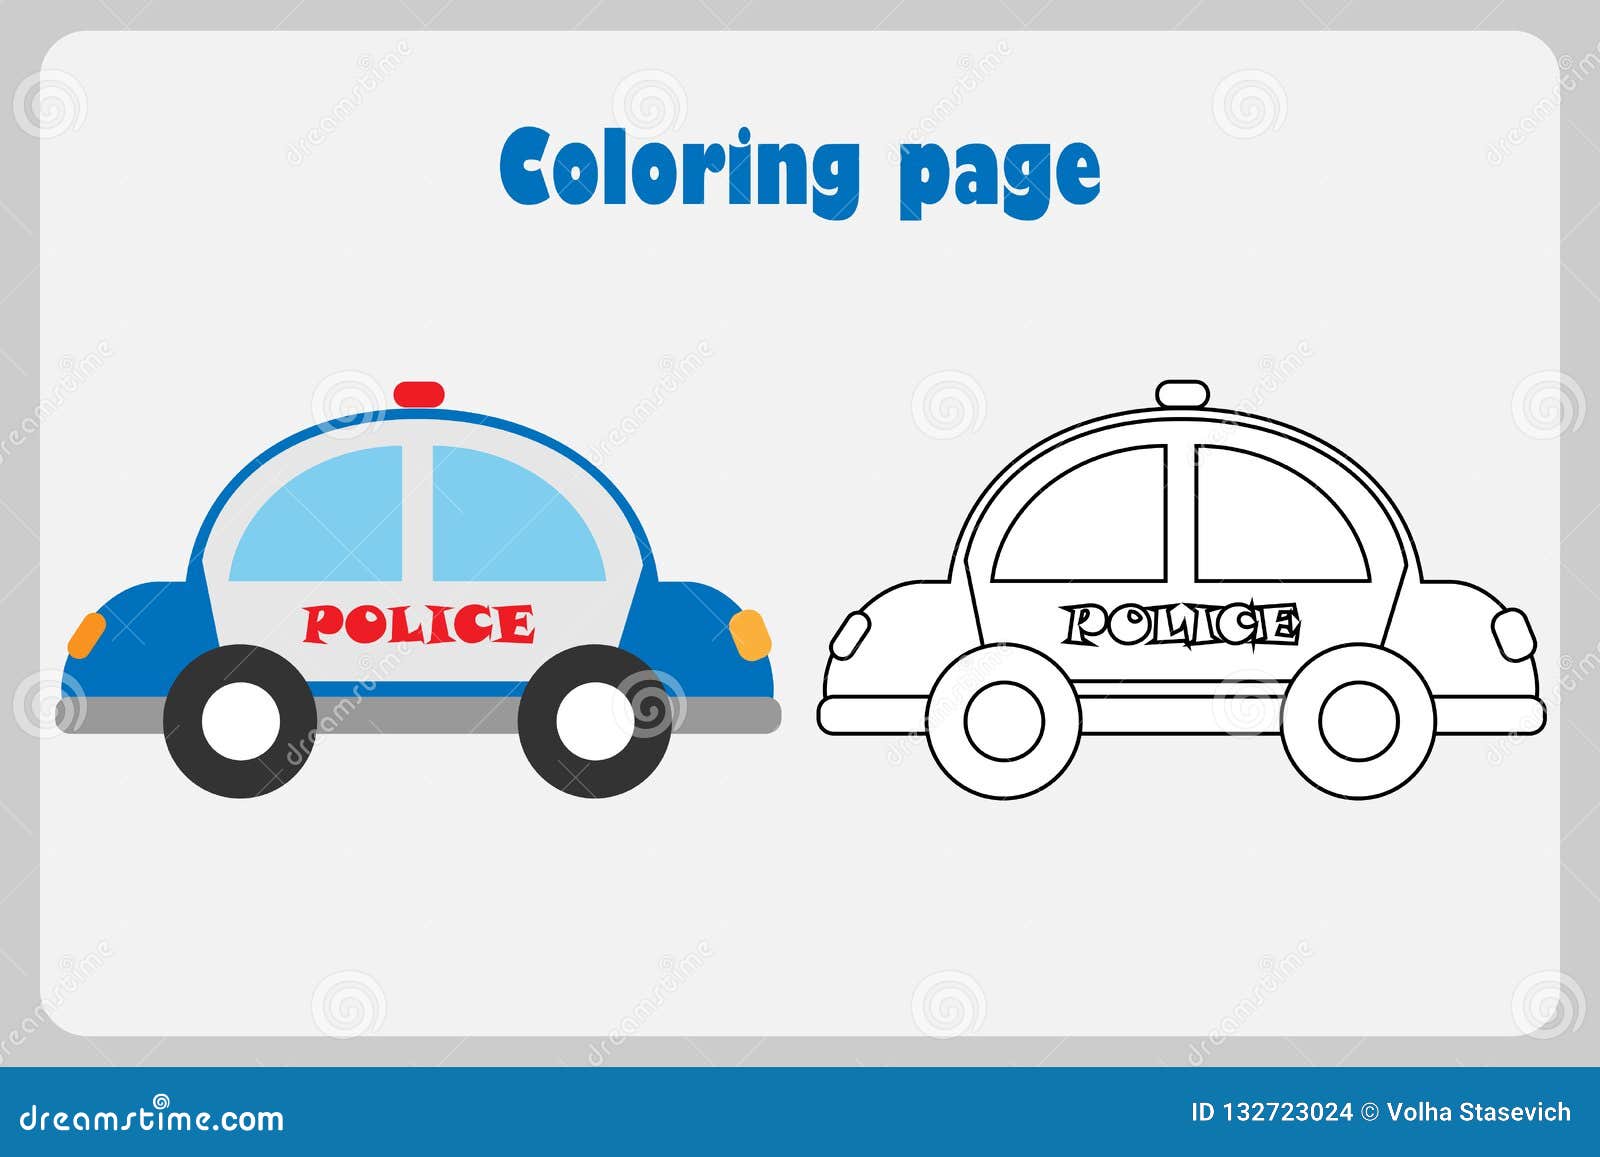 Police car in cartoon style coloring page education paper game for the development of children kids preschool activity stock illustration